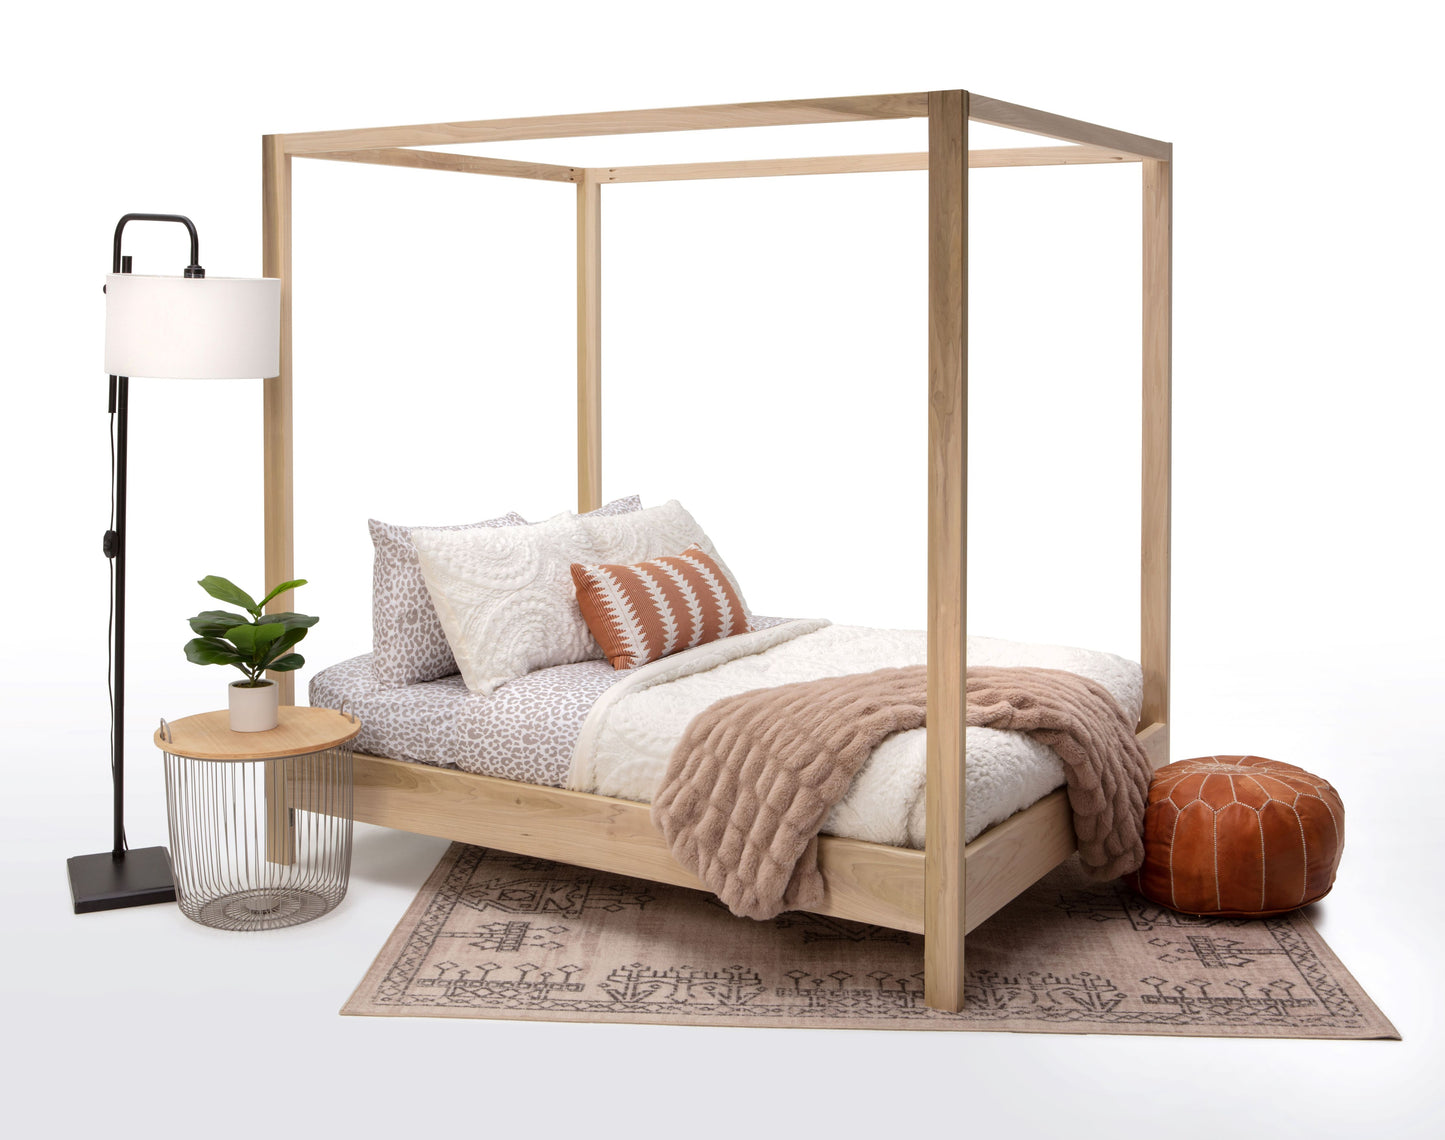 A solid poplar wood canopy bed, showcasing elegant craftsmanship and timeless design. The bed frame is constructed from sturdy poplar wood with a rich finish, featuring a classic canopy design that adds sophistication to any bedroom space.